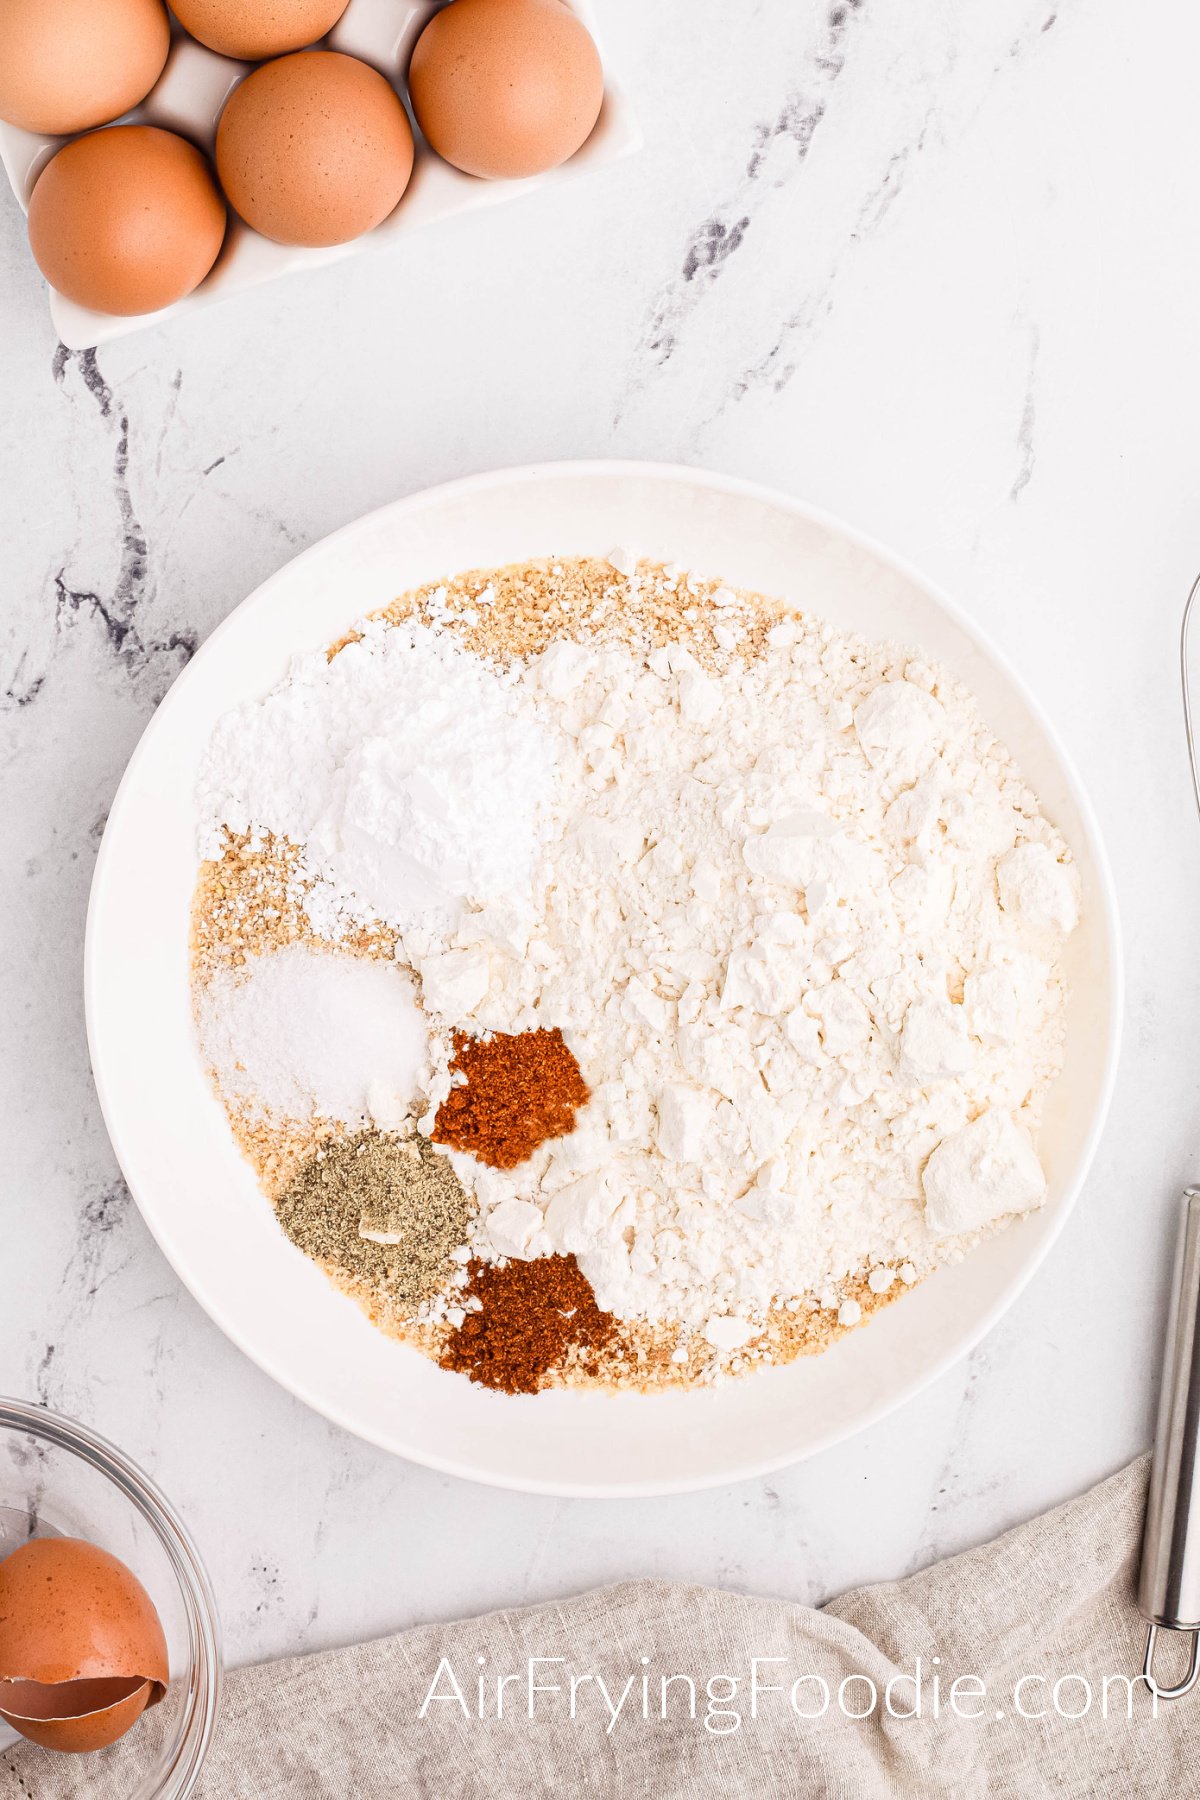 Round white bowl with all the dry ingredients poured in; breadcrumbs, flour, powdered sugar, salt, paprika, pepper, and chili powder.